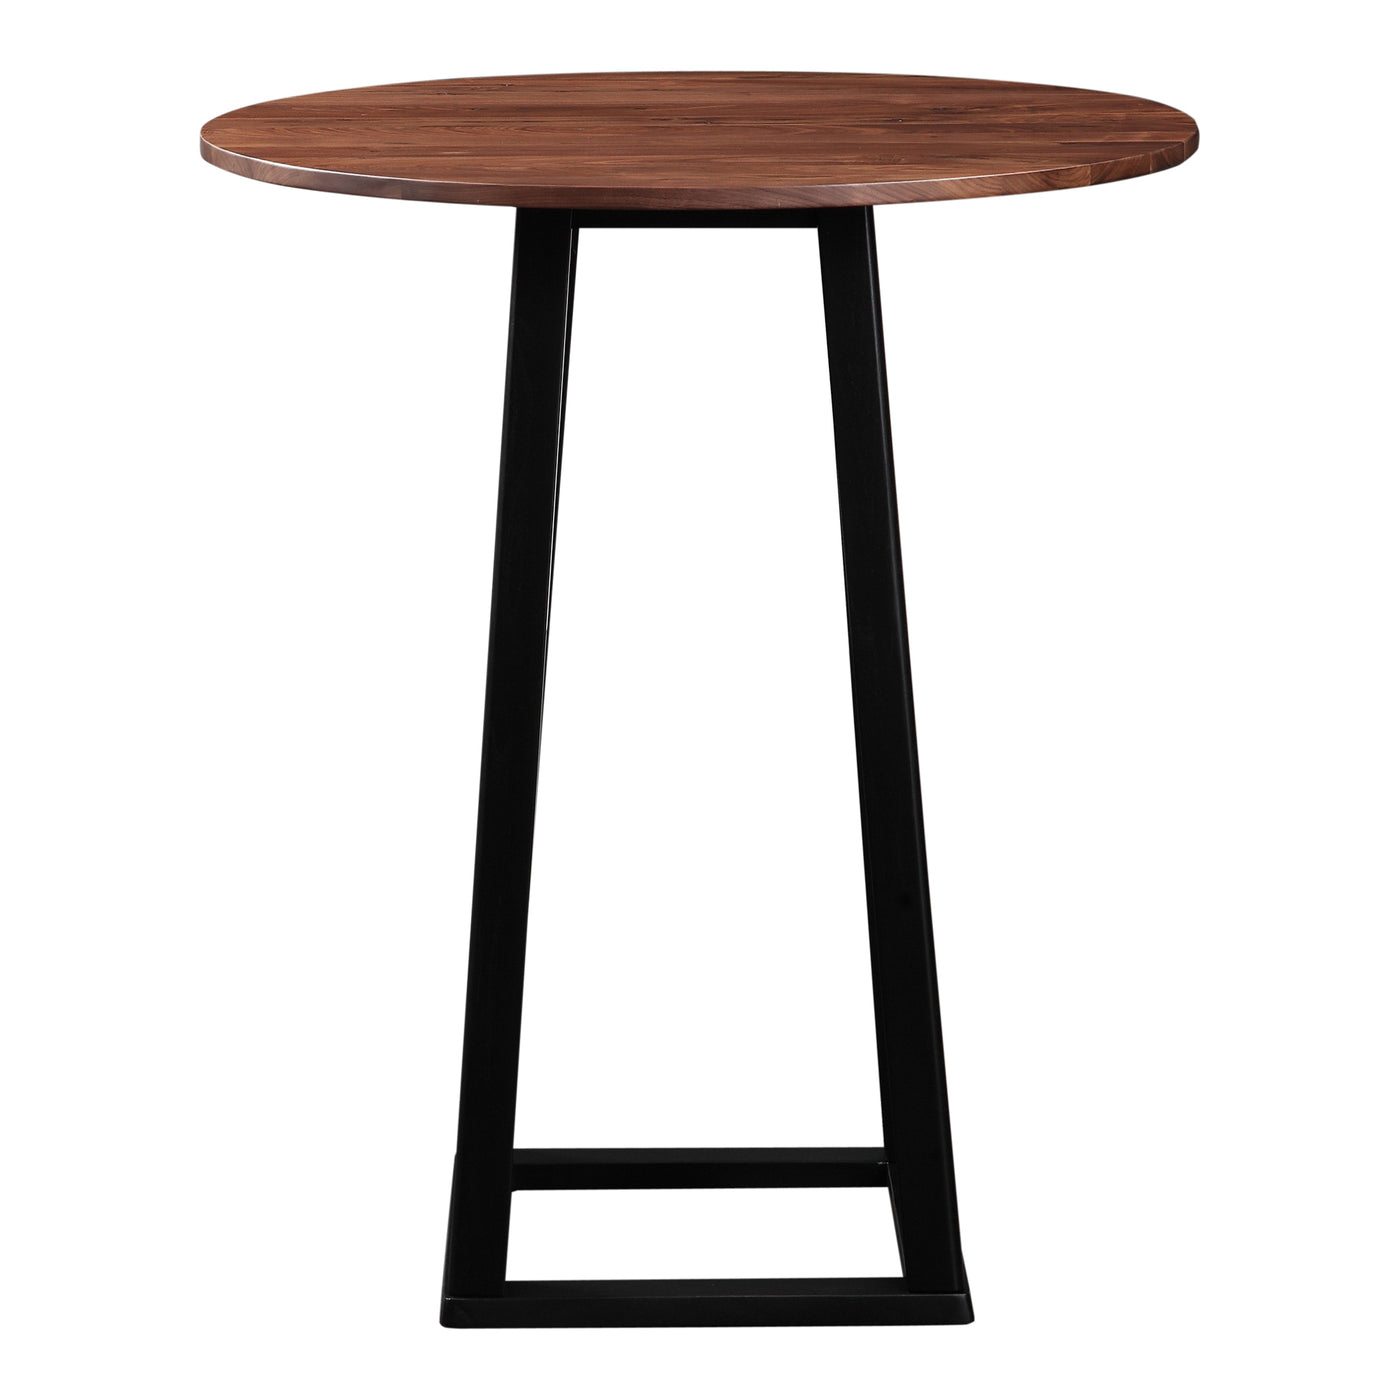 With a solid walnut top and sturdy black rubberwood base, the Tri-Mesa Bar Table is ready for happy hour.
<h6>Dimensions</...